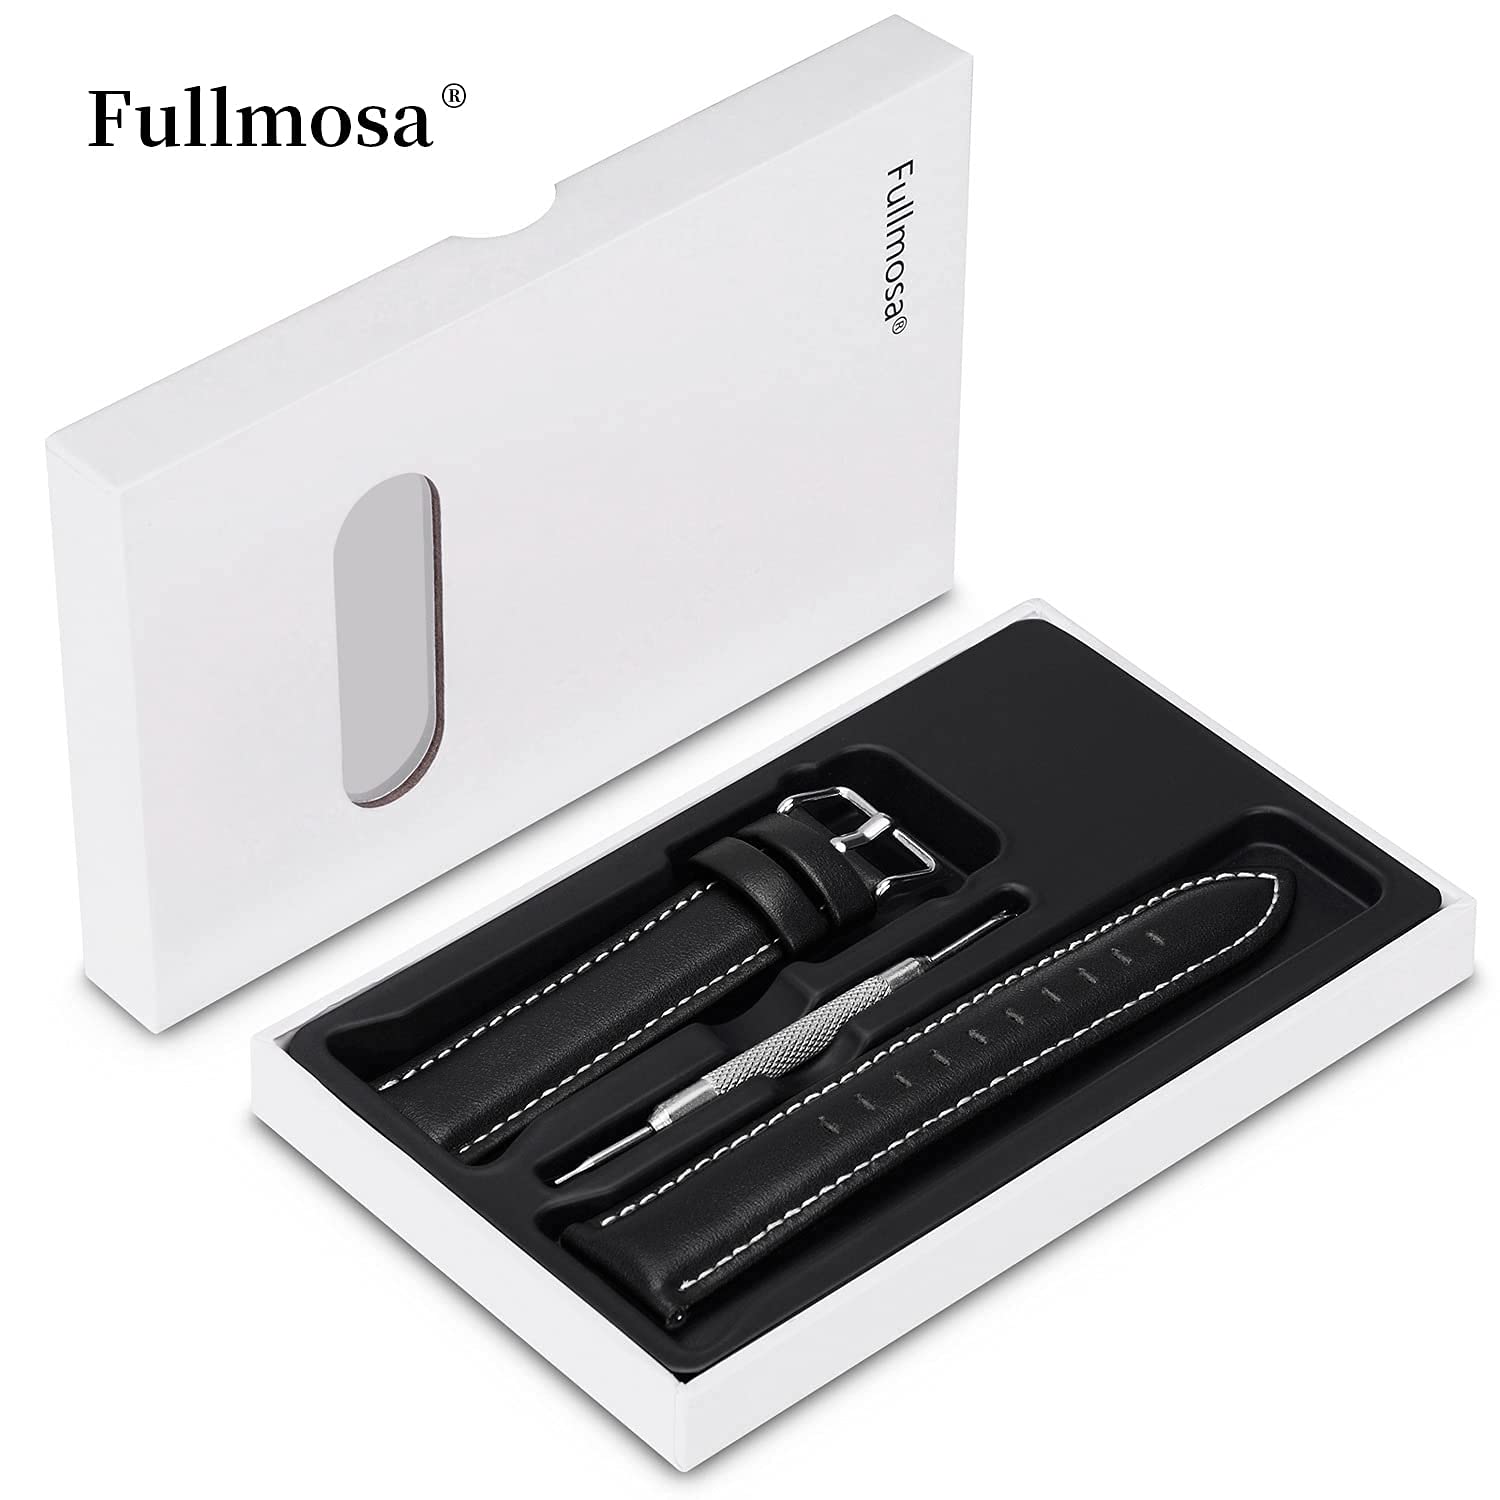 Fullmosa 19mm Leather Watch Bands Compatible with Tissot Le Locle/PRC 200,Casio DW280/290,Umidigi Uwatch 3/Uwatch3 GPS/Uwatch GT,Black